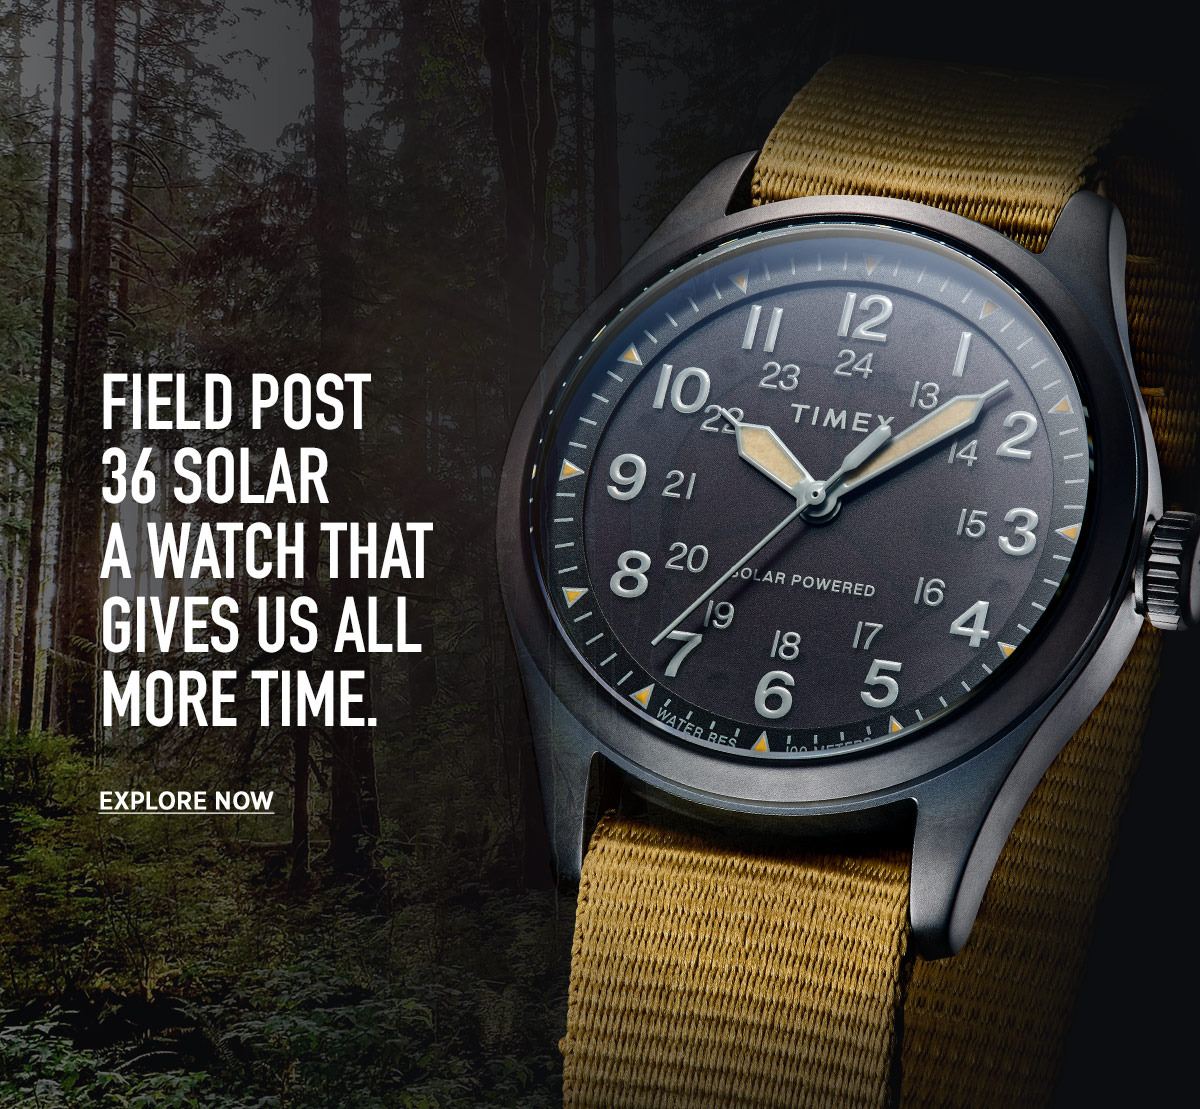 FIELD POST 36 SOLAR | A WATCH THAT GIVES US ALL MORE TIME | EXPLORE NOW